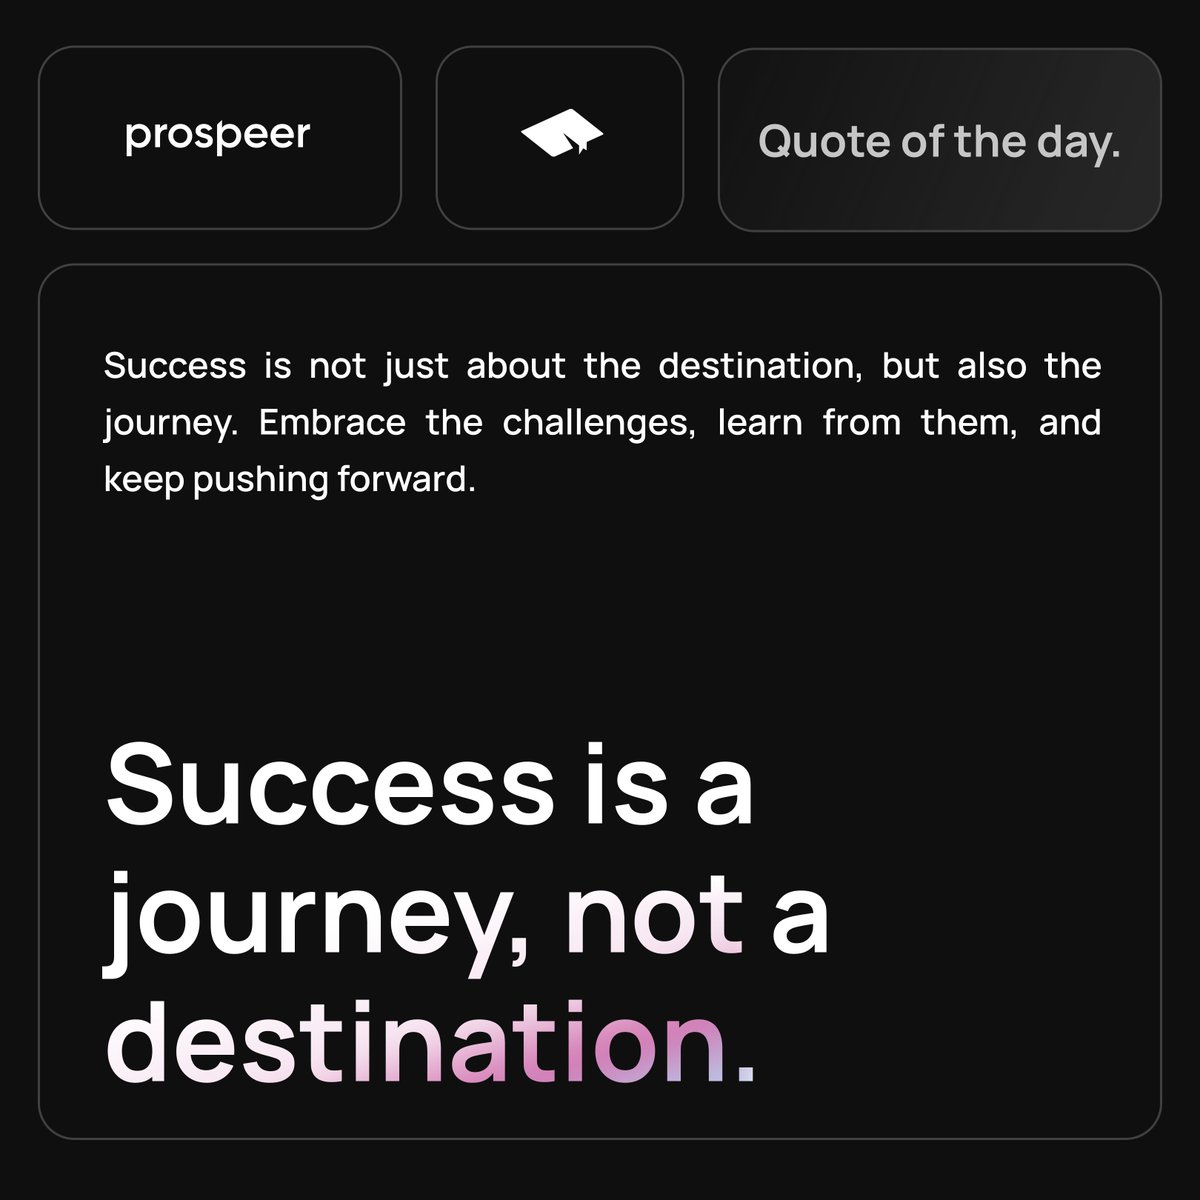 Success is a journey, not a destination. Embrace the challenges, learn from them, and keep pushing forward to reach new heights. 💪✨

#JourneyToSuccess #EmbraceTheChallenges #LearnAndGrow #TipoftheDay